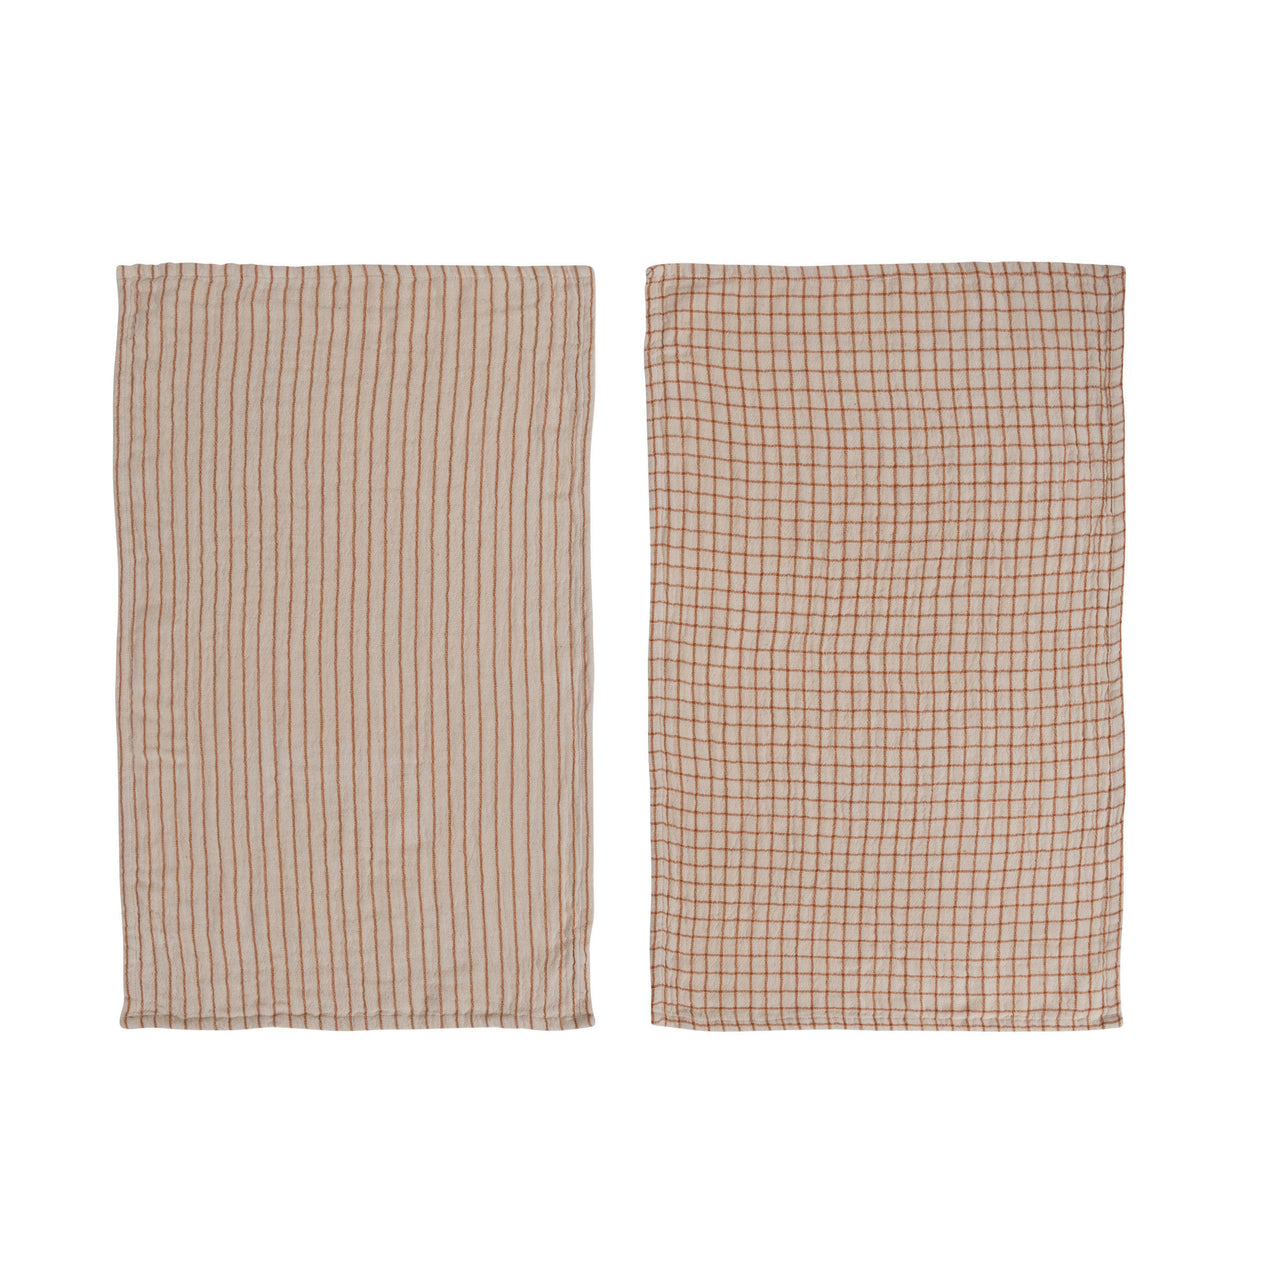 Cotton Double Cloth Tea Towel, Natural and Rust